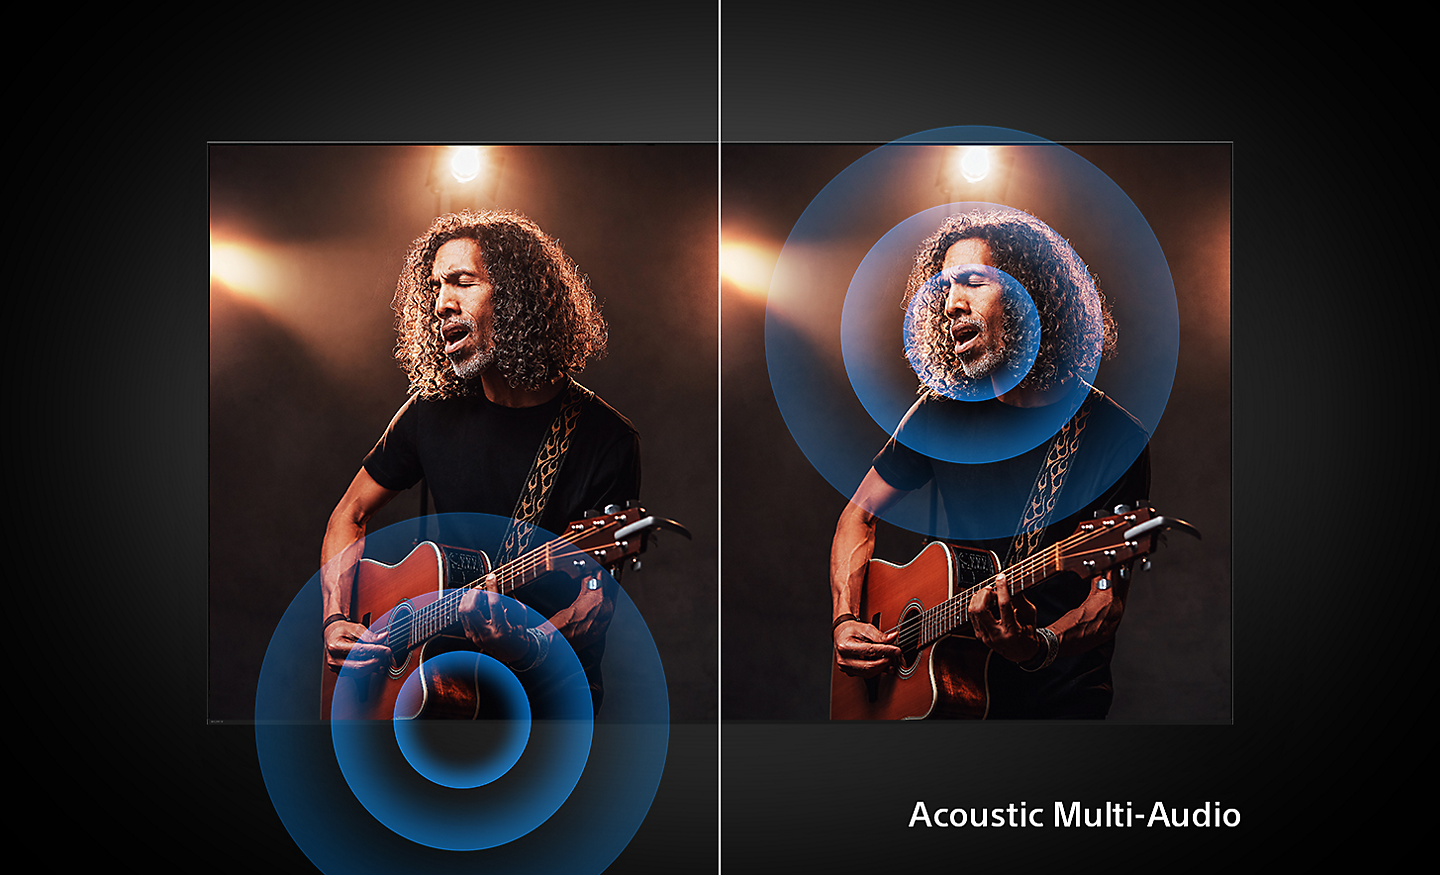 Split screen of a guitarist with left image showing how a conventional TV emits sound from beneath the screen and right image showing how a BRAVIA with Acoustic Multi-Audio emits sound from the guitarist for more realism